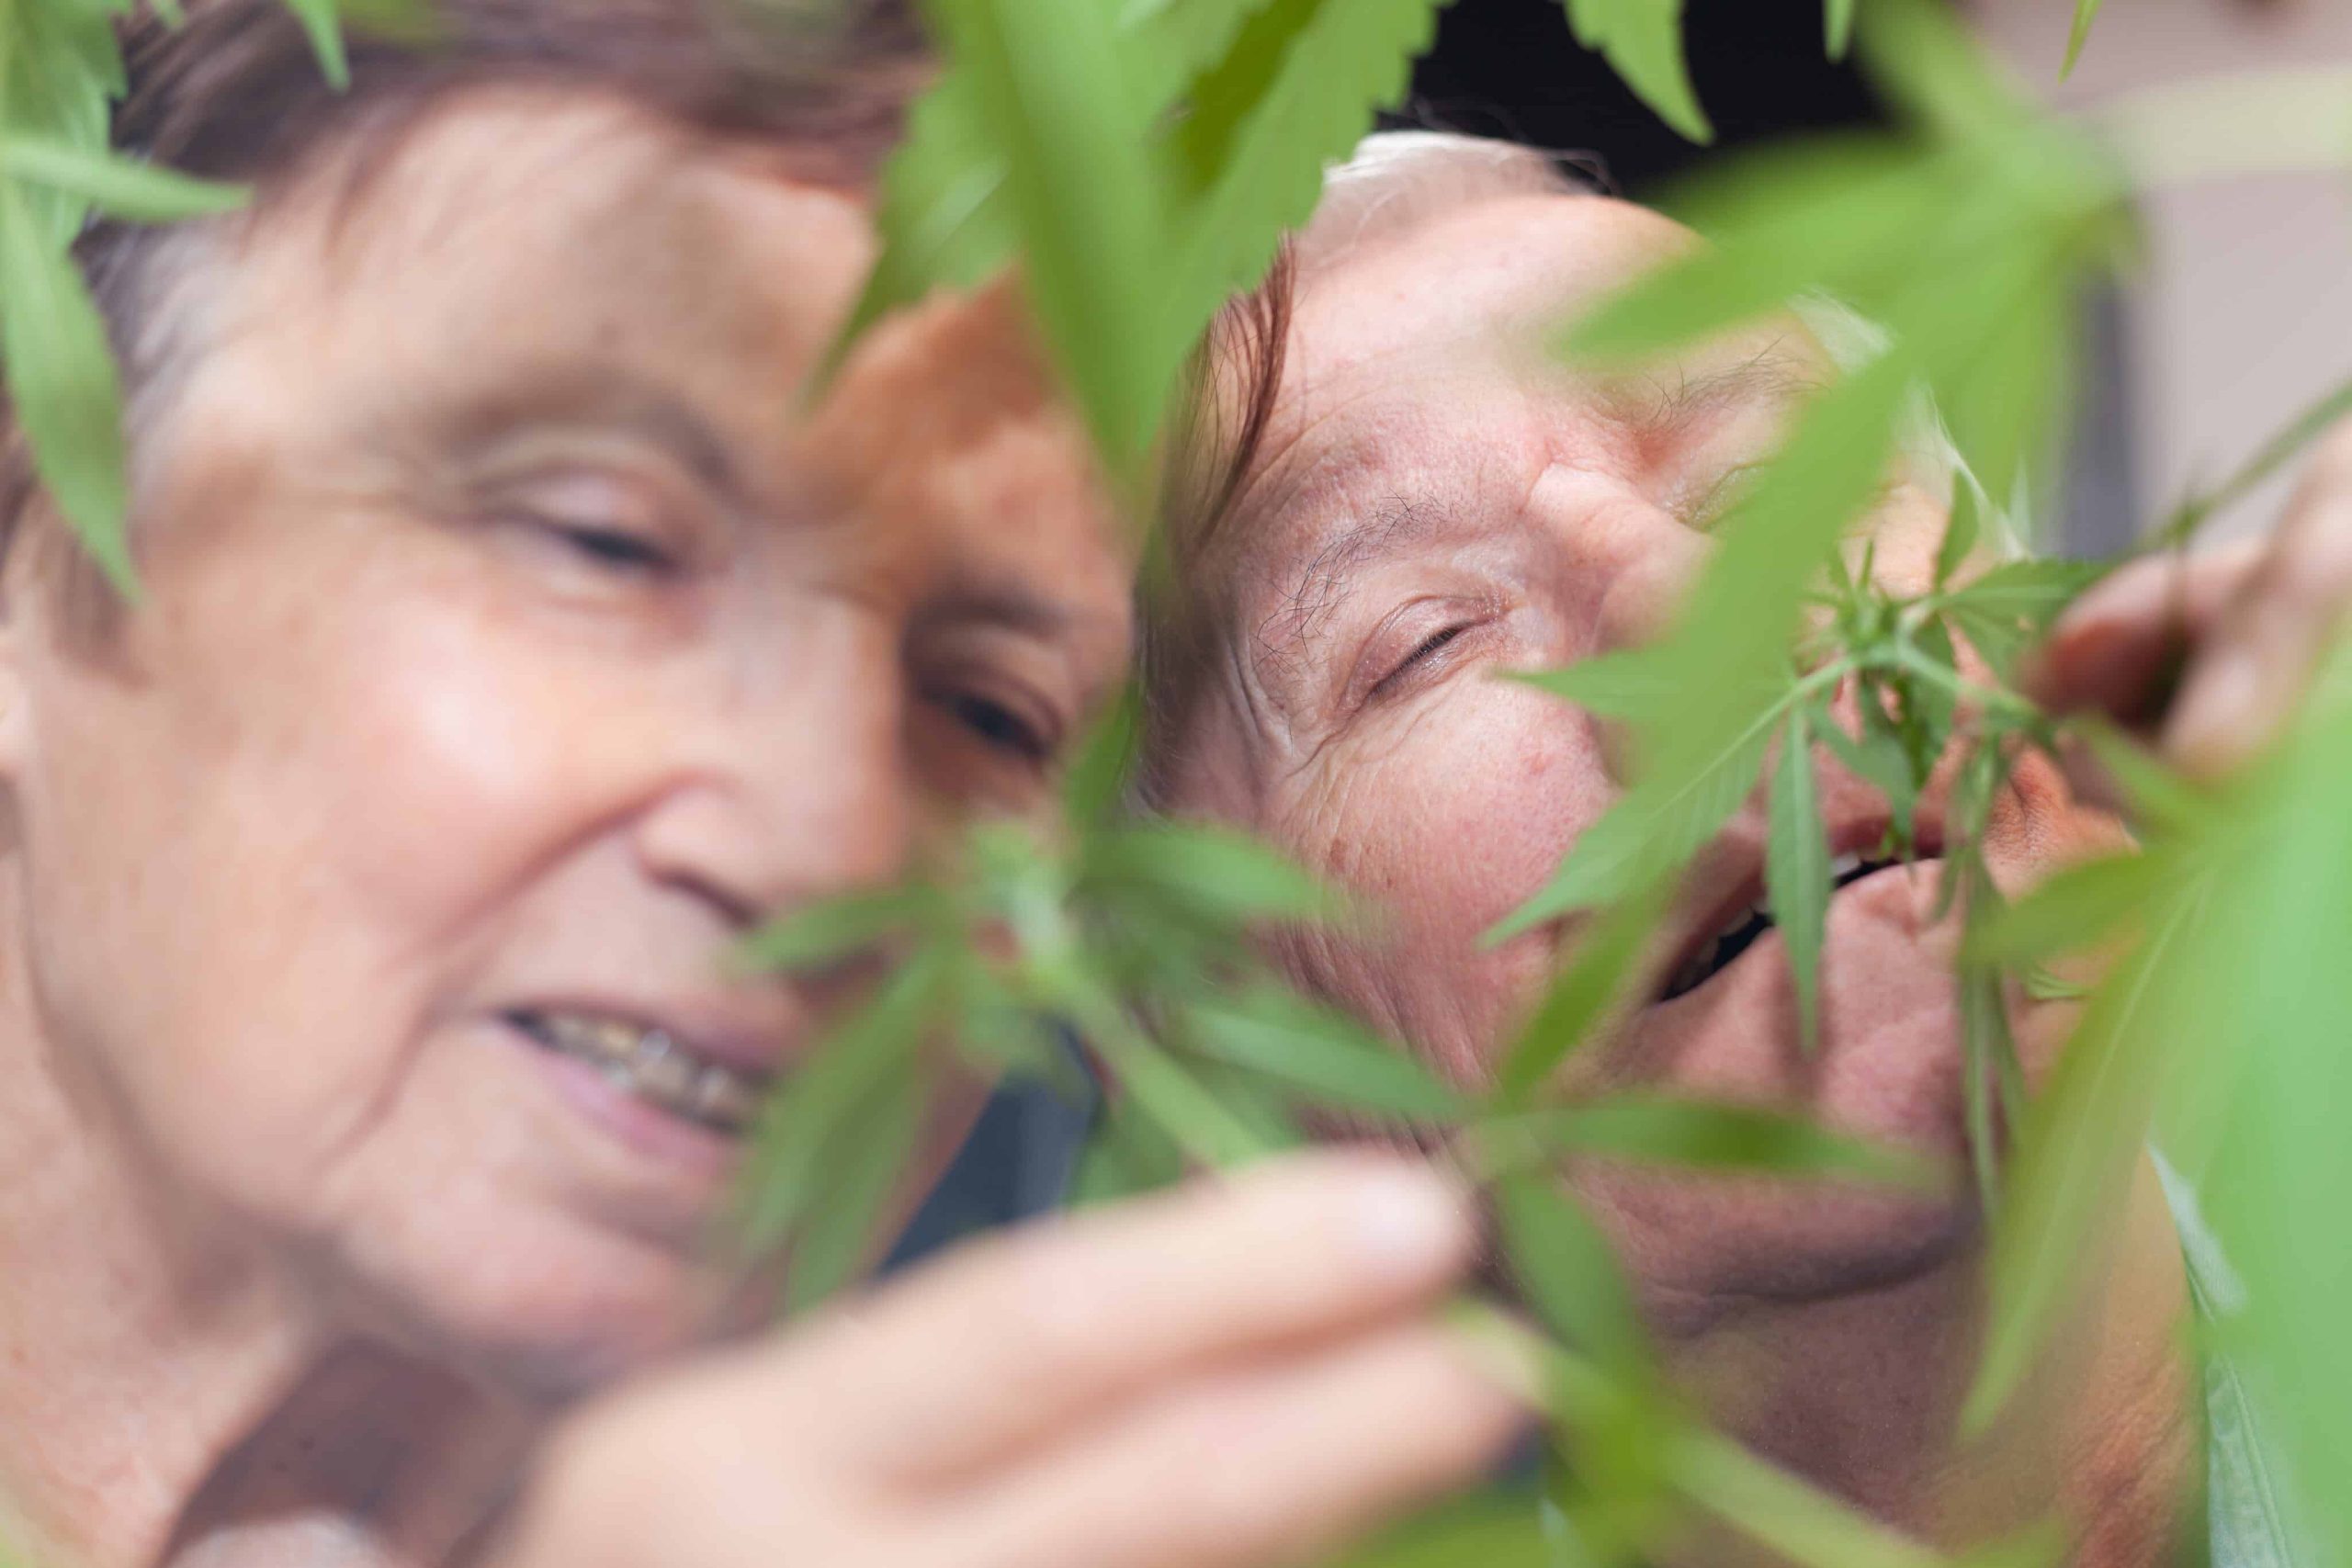 Doctors Warn Seniors About Consuming Too Much THC